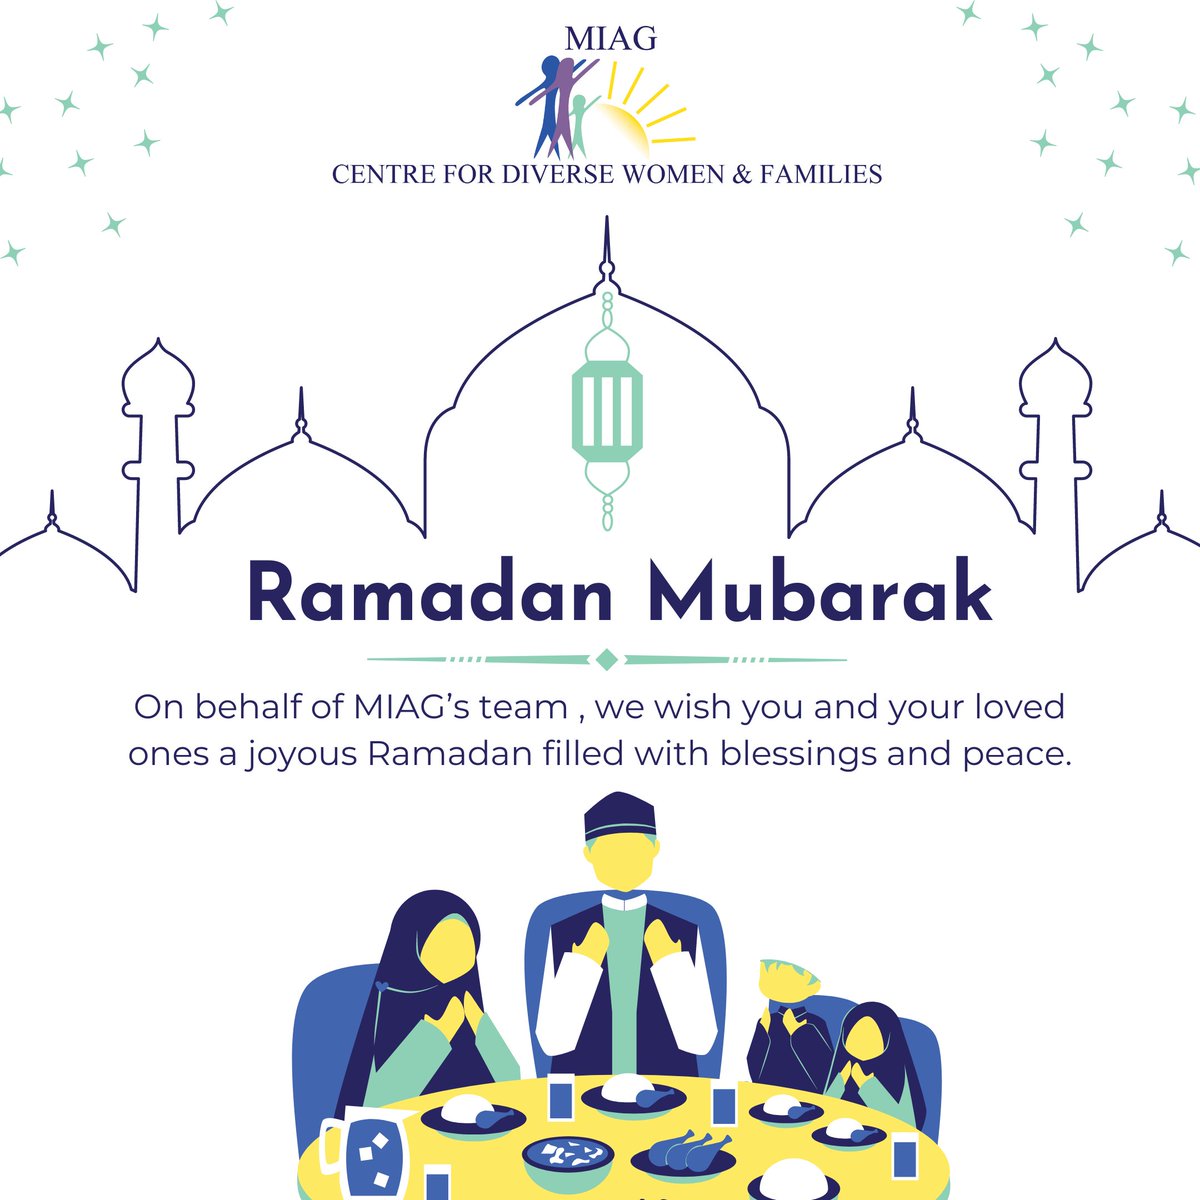 On behalf of MIAG's team, we extend warm wishes to you and your loved ones for a joyous Ramadan filled with blessings and peace. May this holy month be a time of reflection, gratitude, and spiritual growth. 

🌟 Ramadan Mubarak!  #MIAGGreetings #RamadanBlessings #PeaceAndJoy